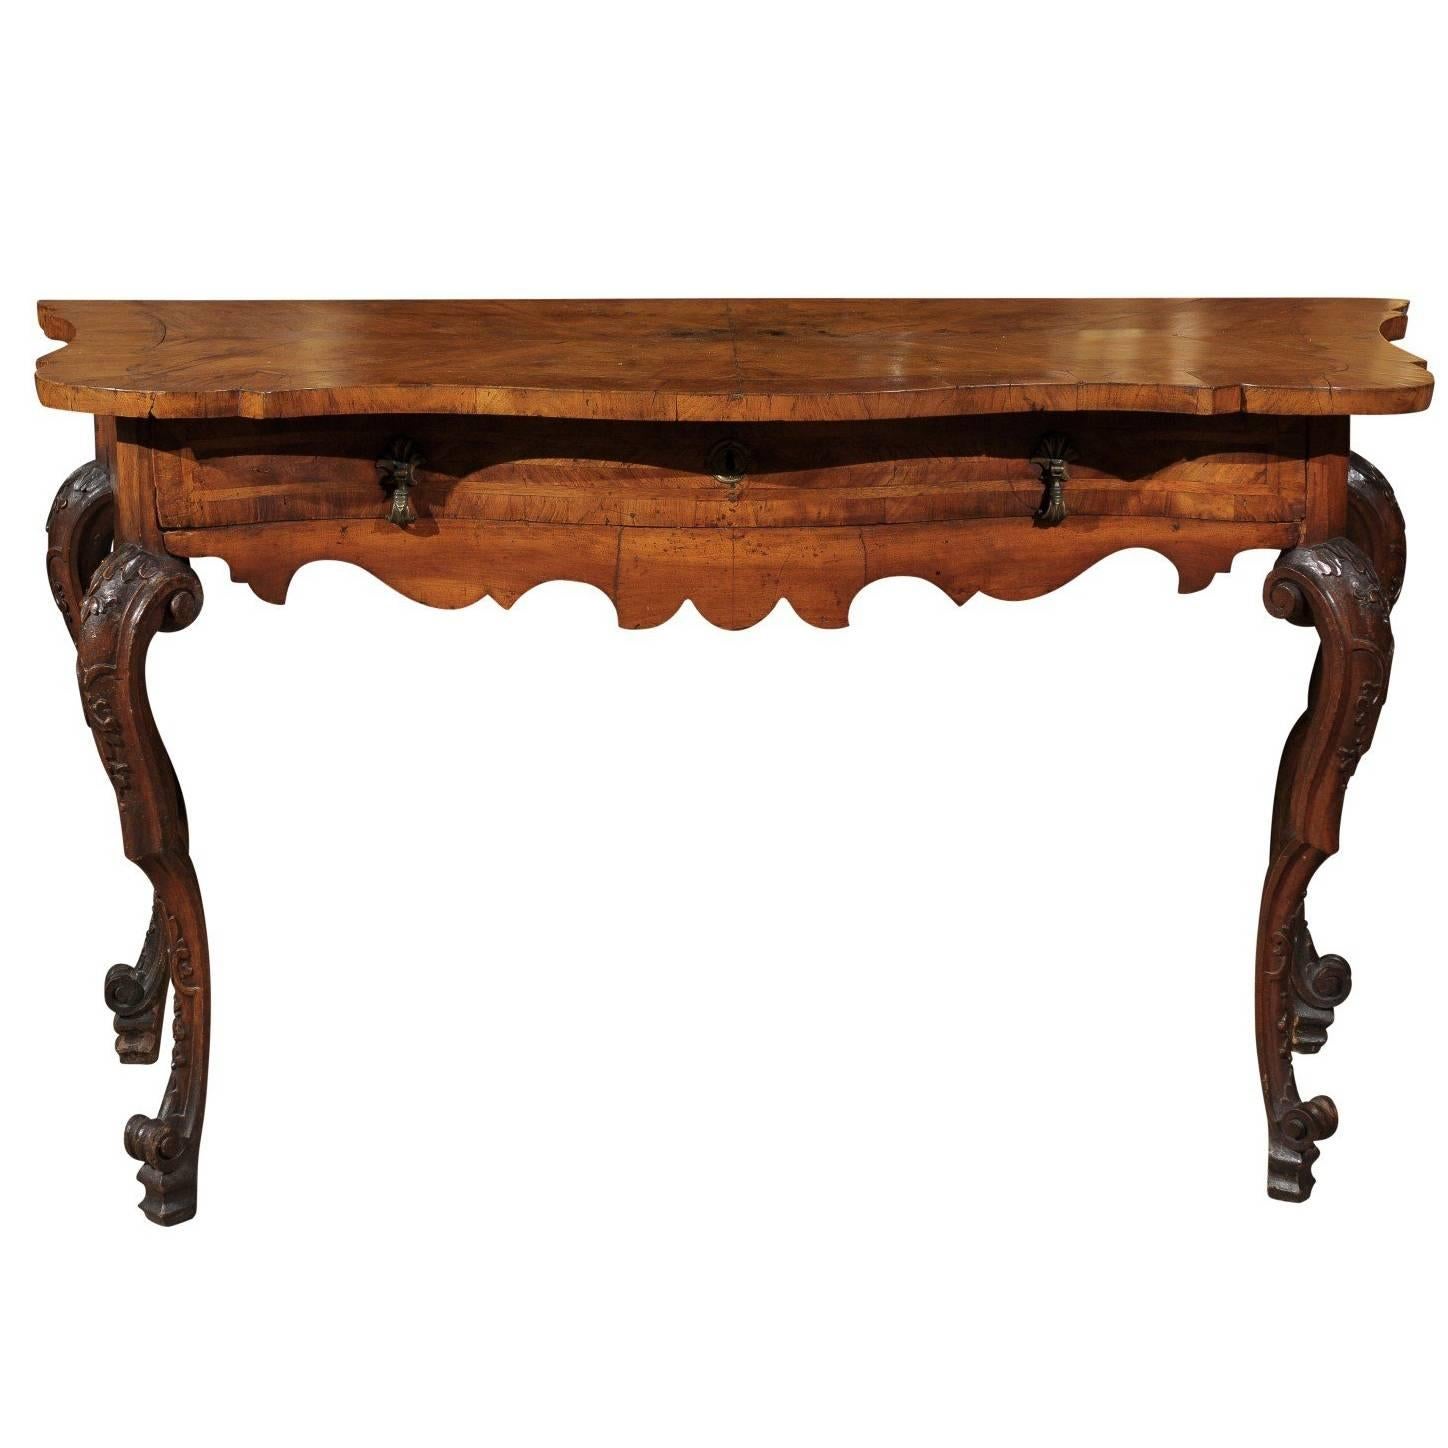 18th Century Italian Rococo Walnut Console with Serpentine Top and Carved Legs